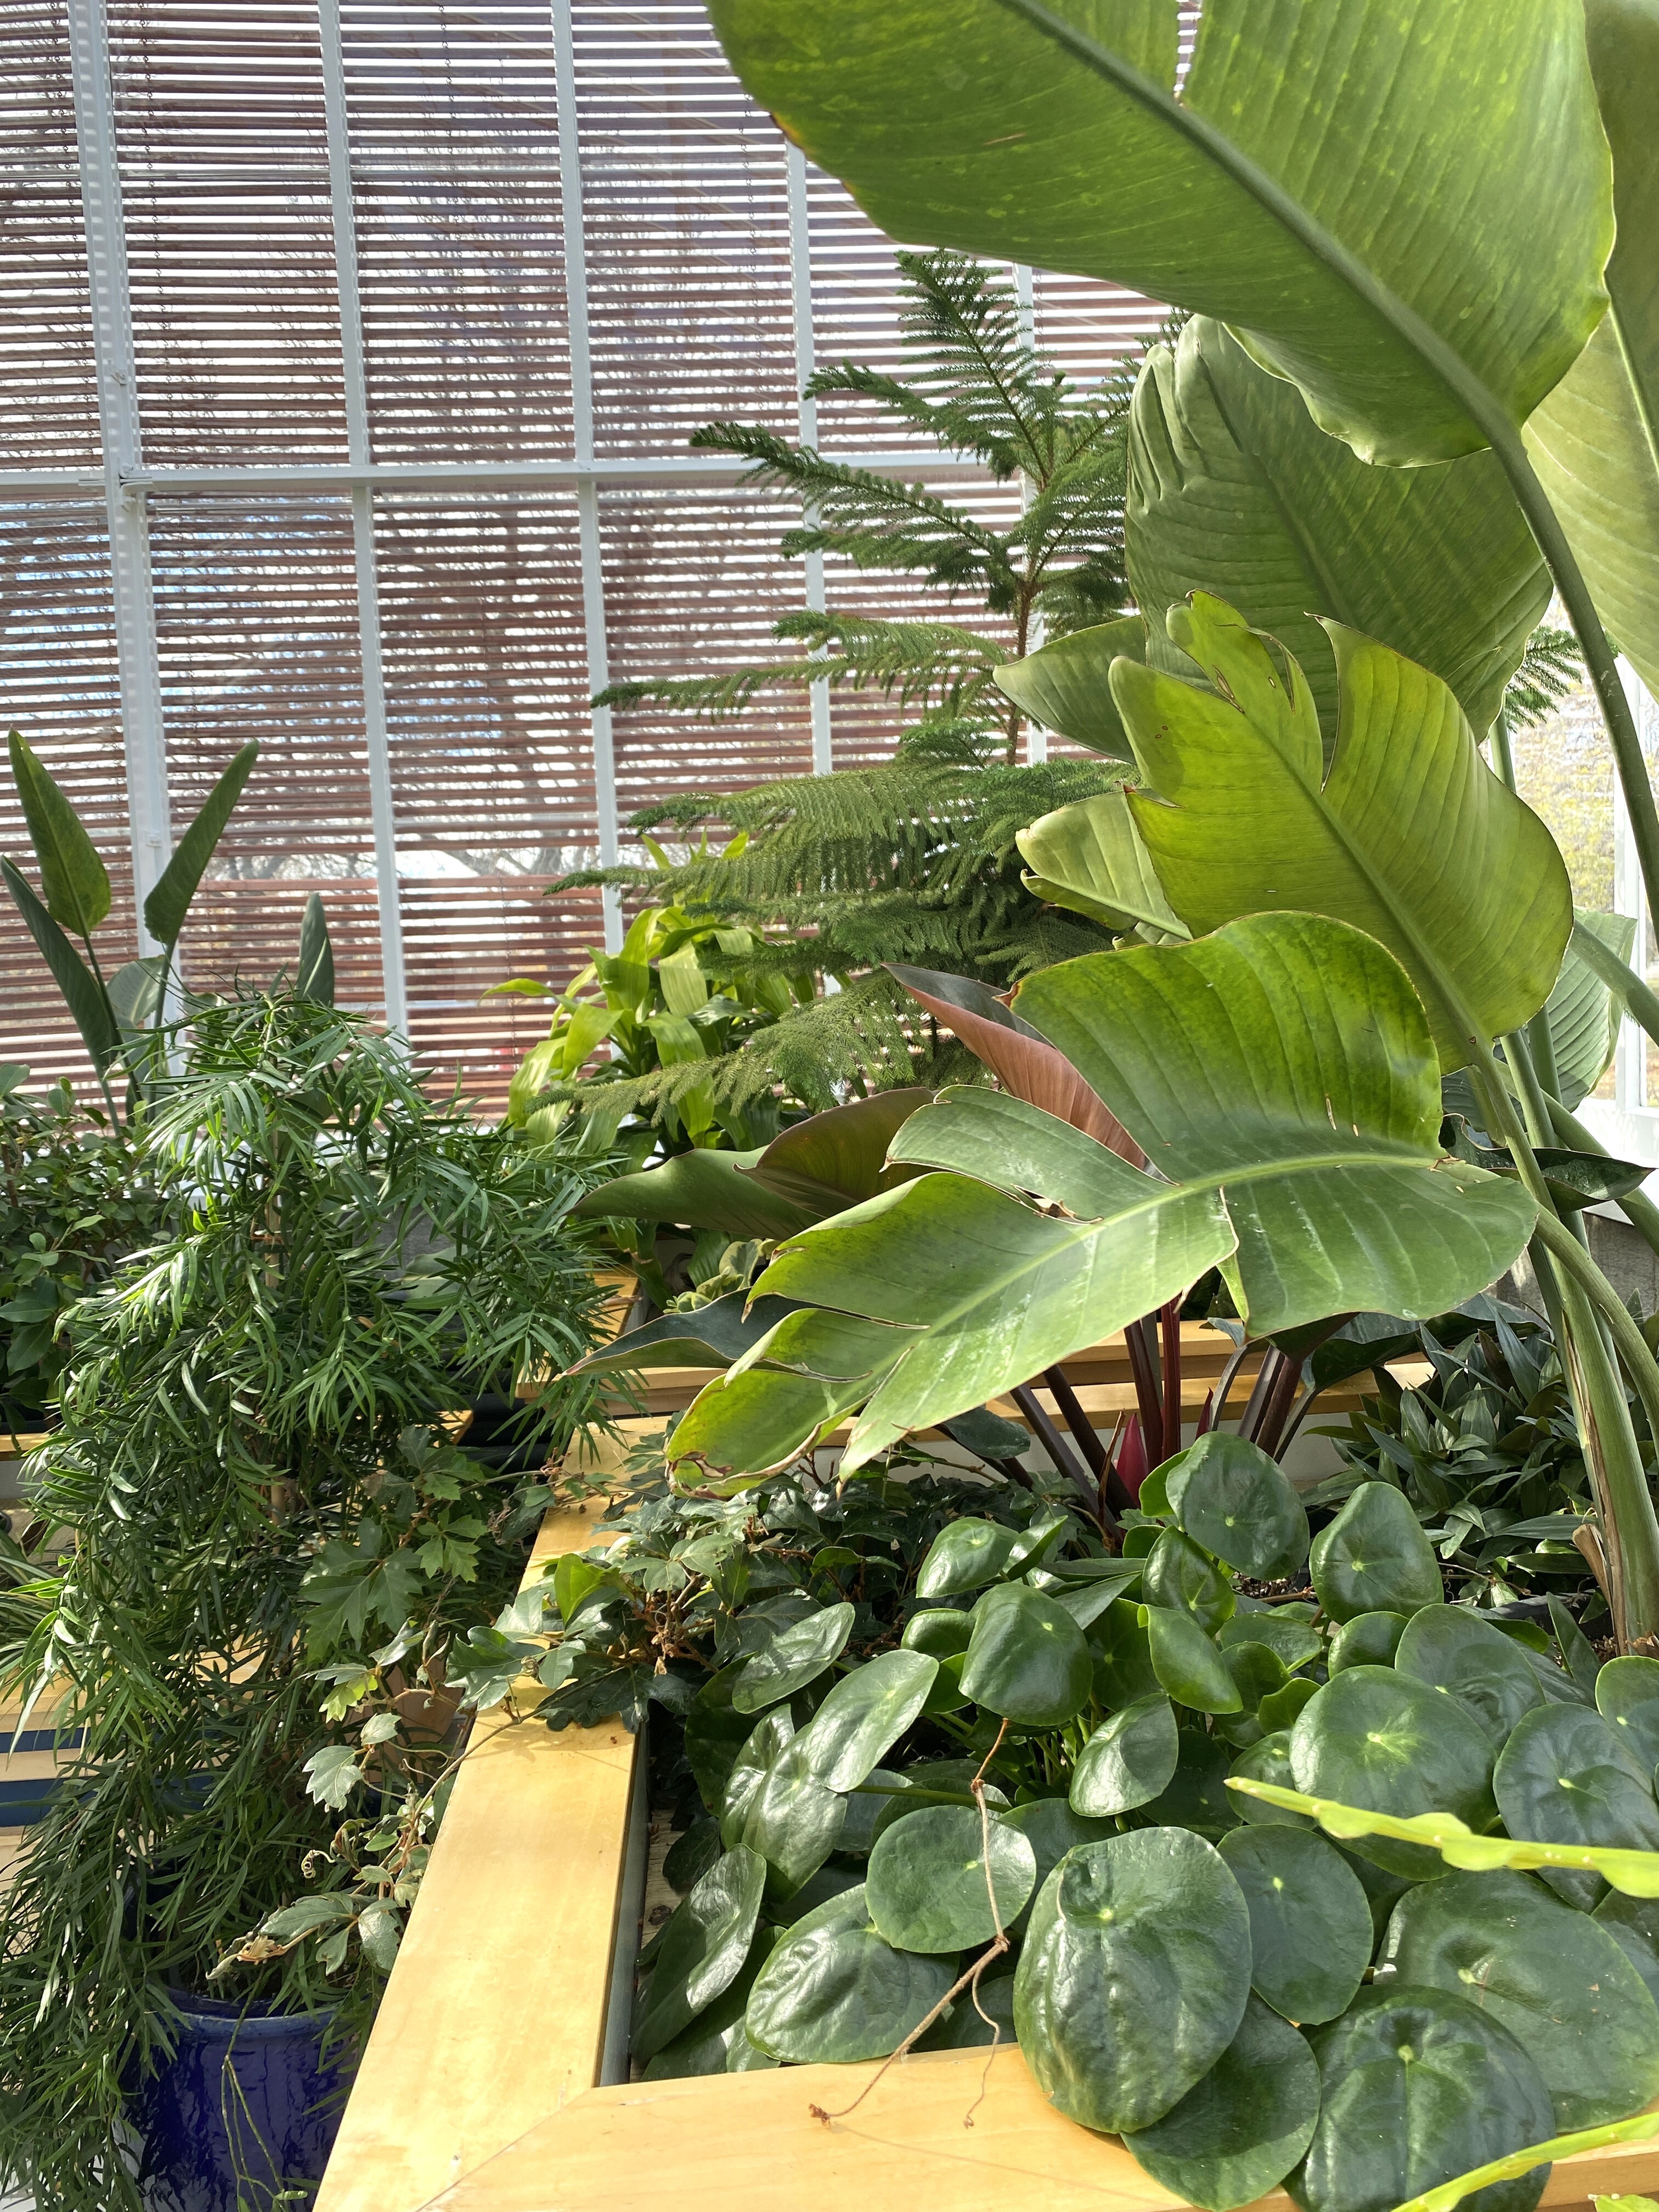 Tropical plants in front of the windows of the conservatory in Government House SK